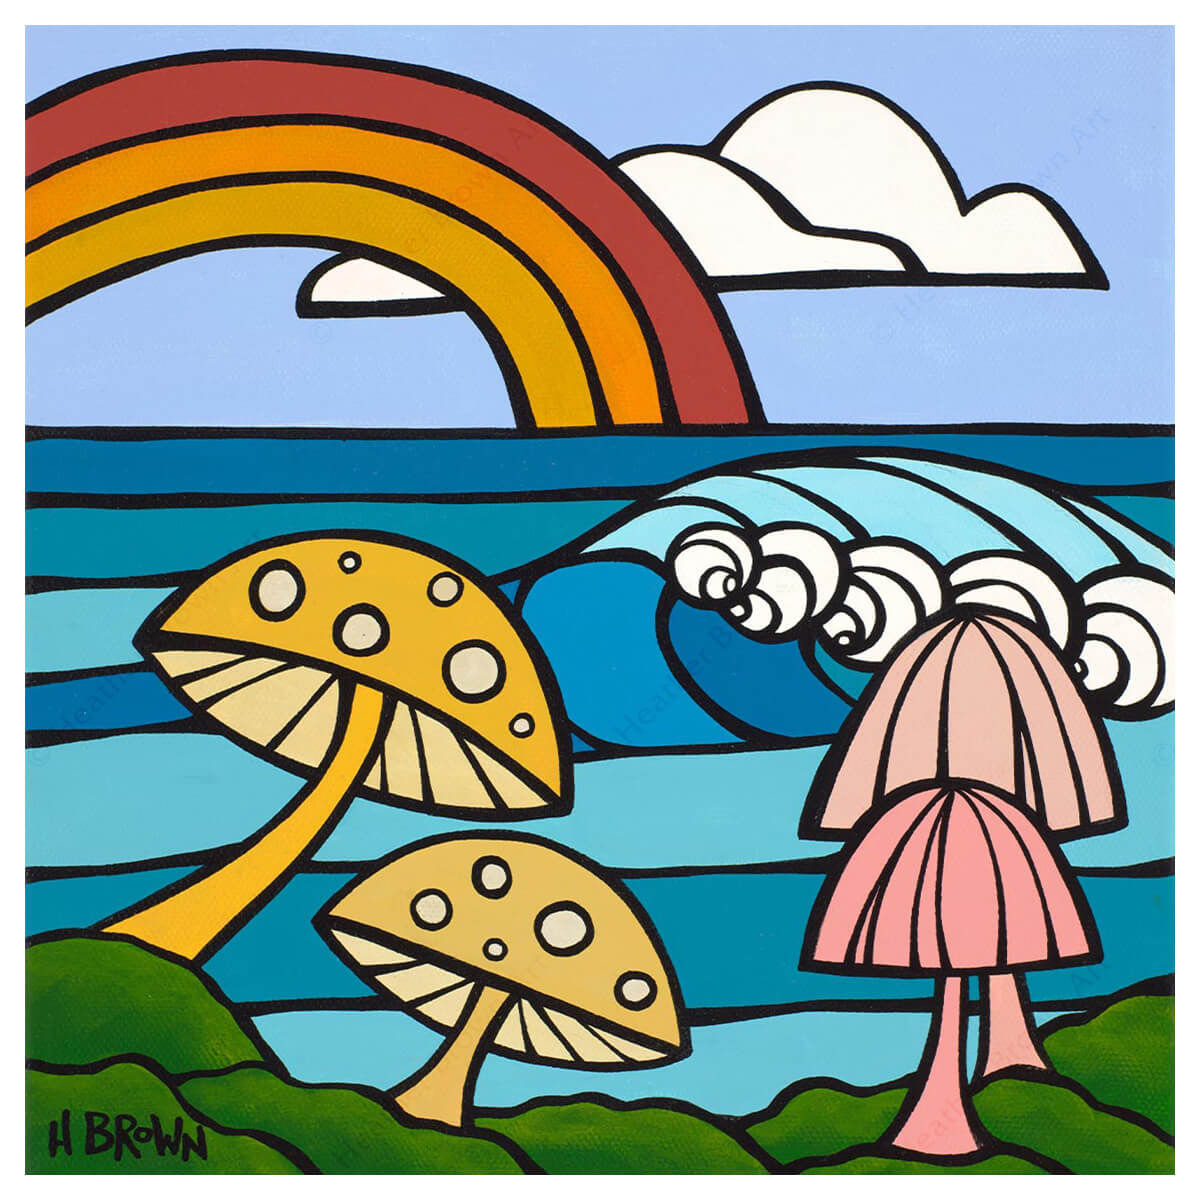 Tropical mushroom art by Hawaii artist Heather Brown, with colorful shrooms and a rainbow over the ocean.